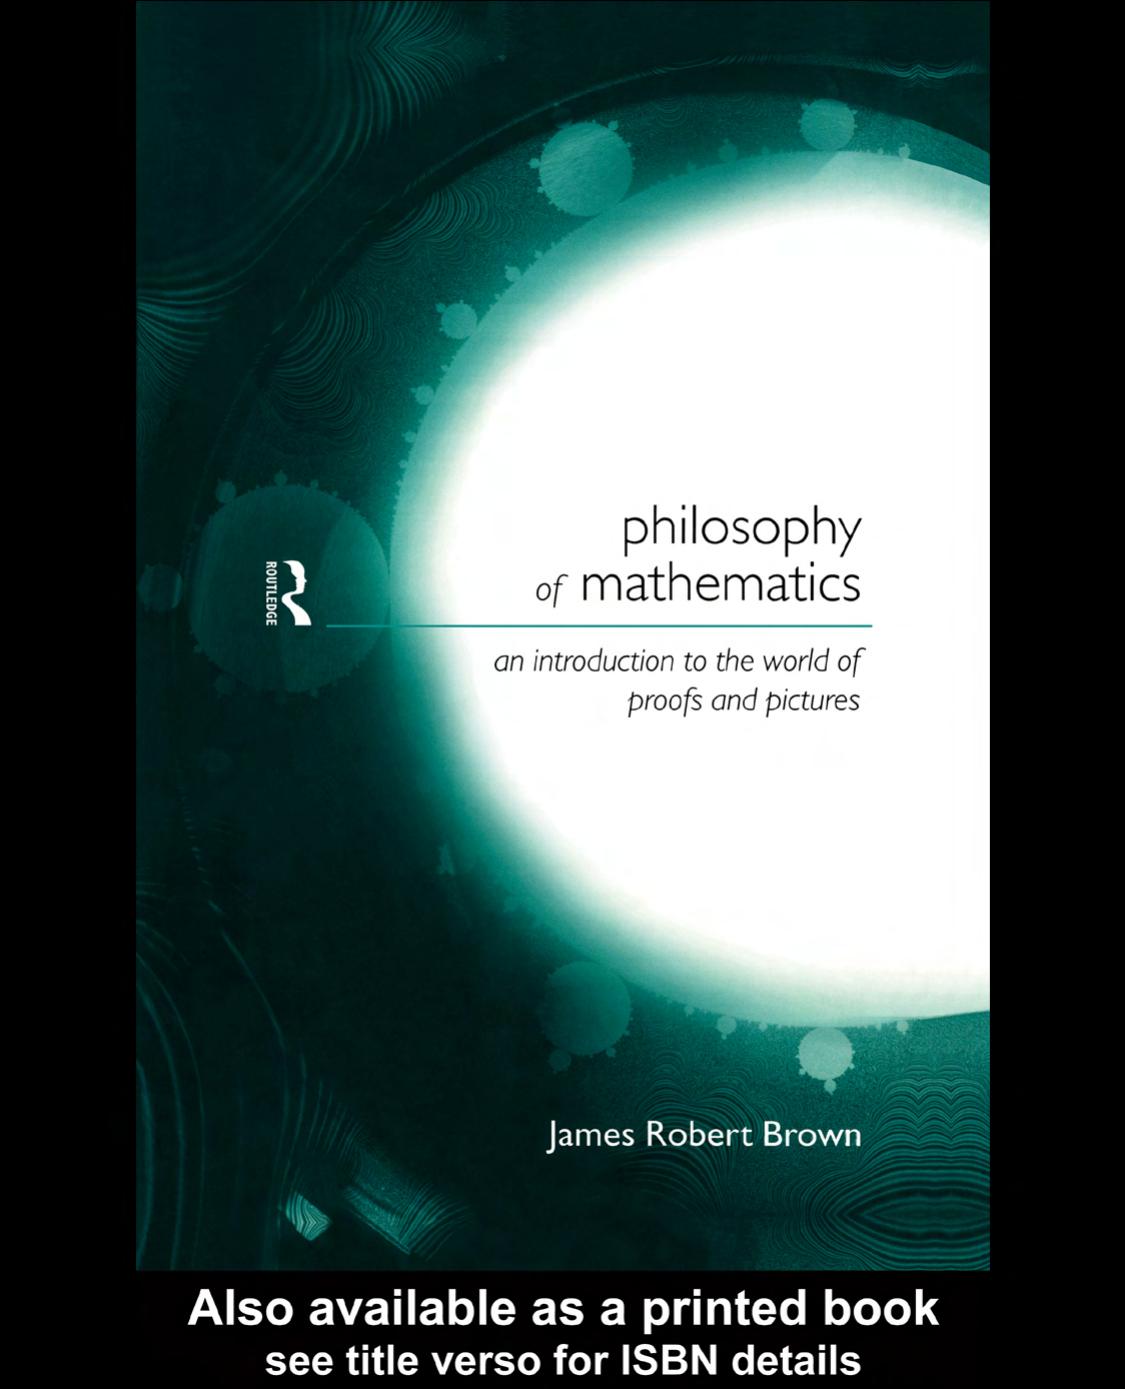 Philosophy of Mathematics: An Introduction to the World of Proofs and Pictures